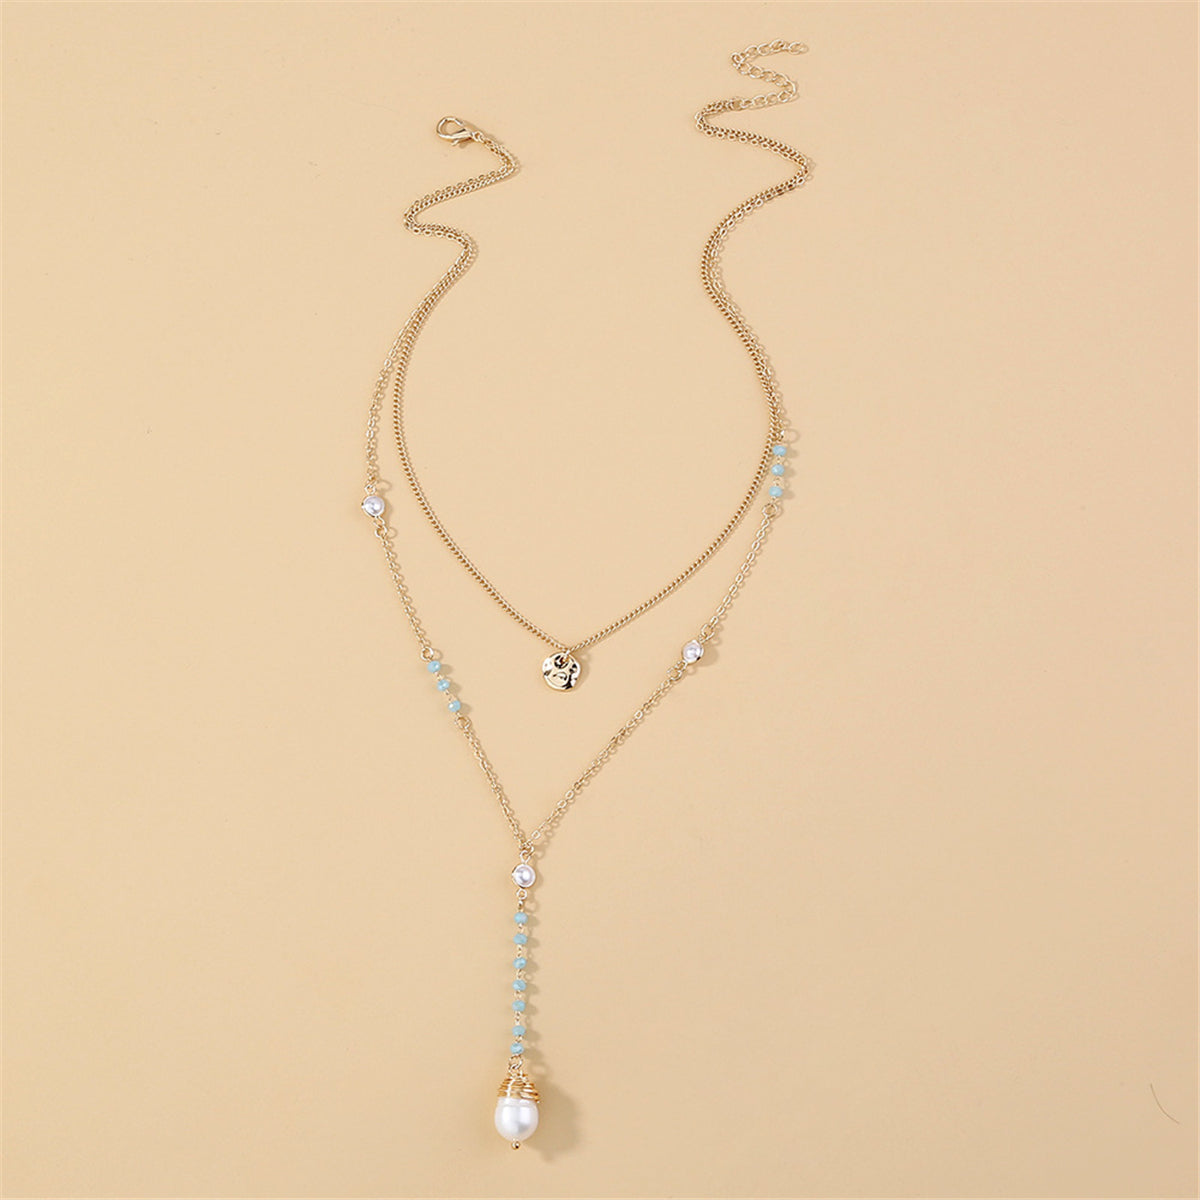 Pearl & Acrylic 18K Gold-Plated Layered Beaded Drop Necklace